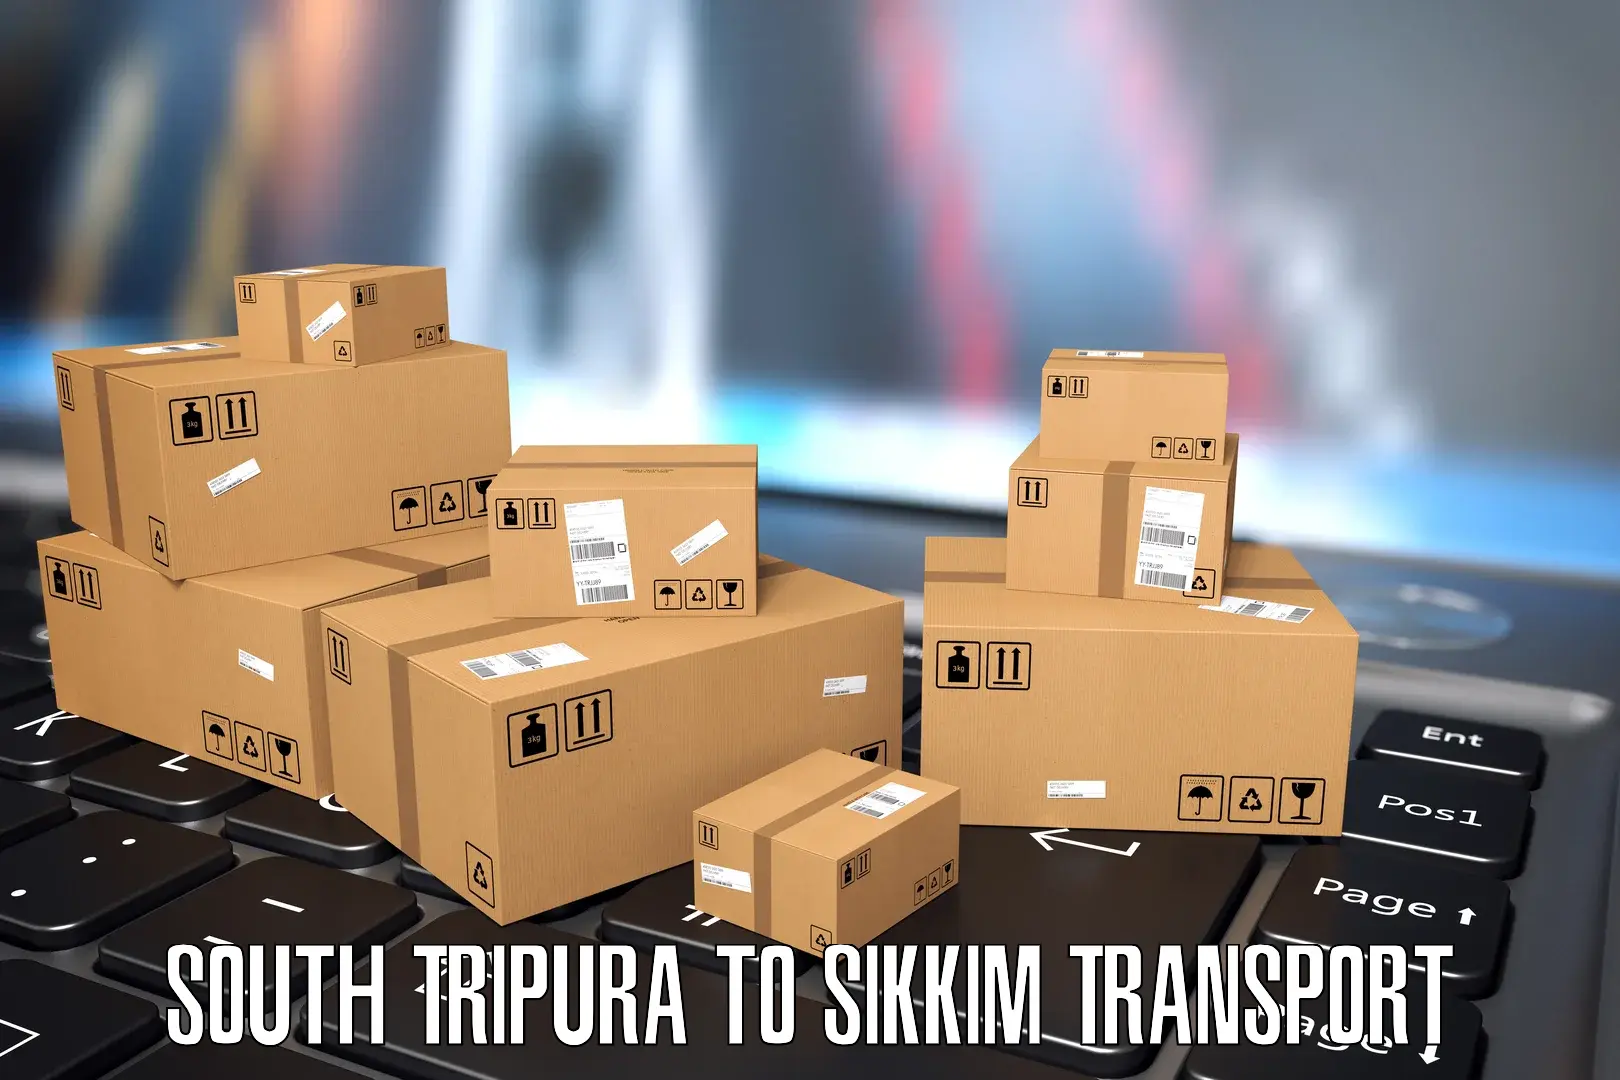 Daily transport service South Tripura to South Sikkim